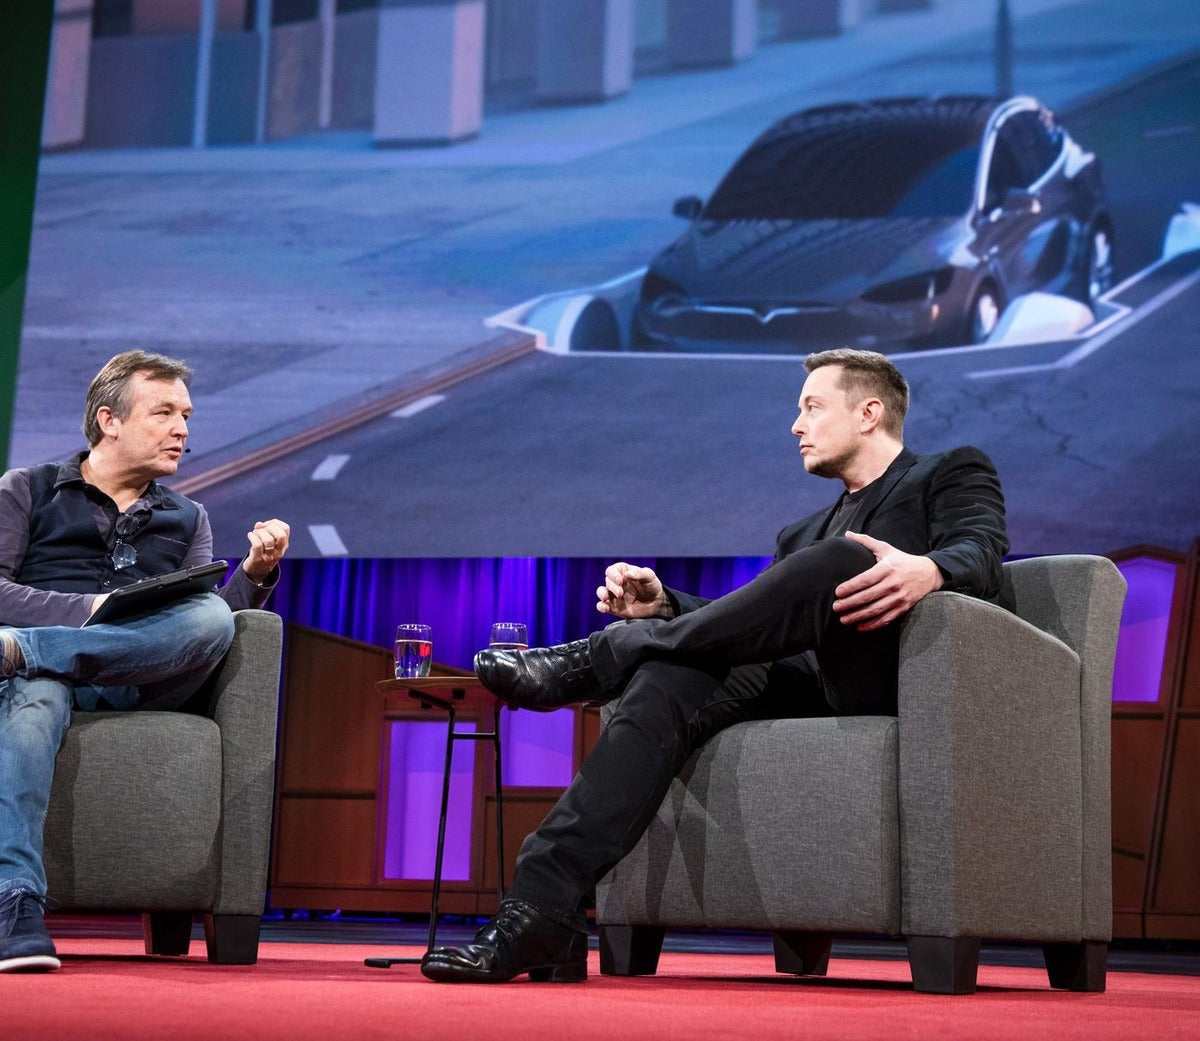 Elon Musk to Join Technology Entertainment & Design 2022 Conference in Vancouver